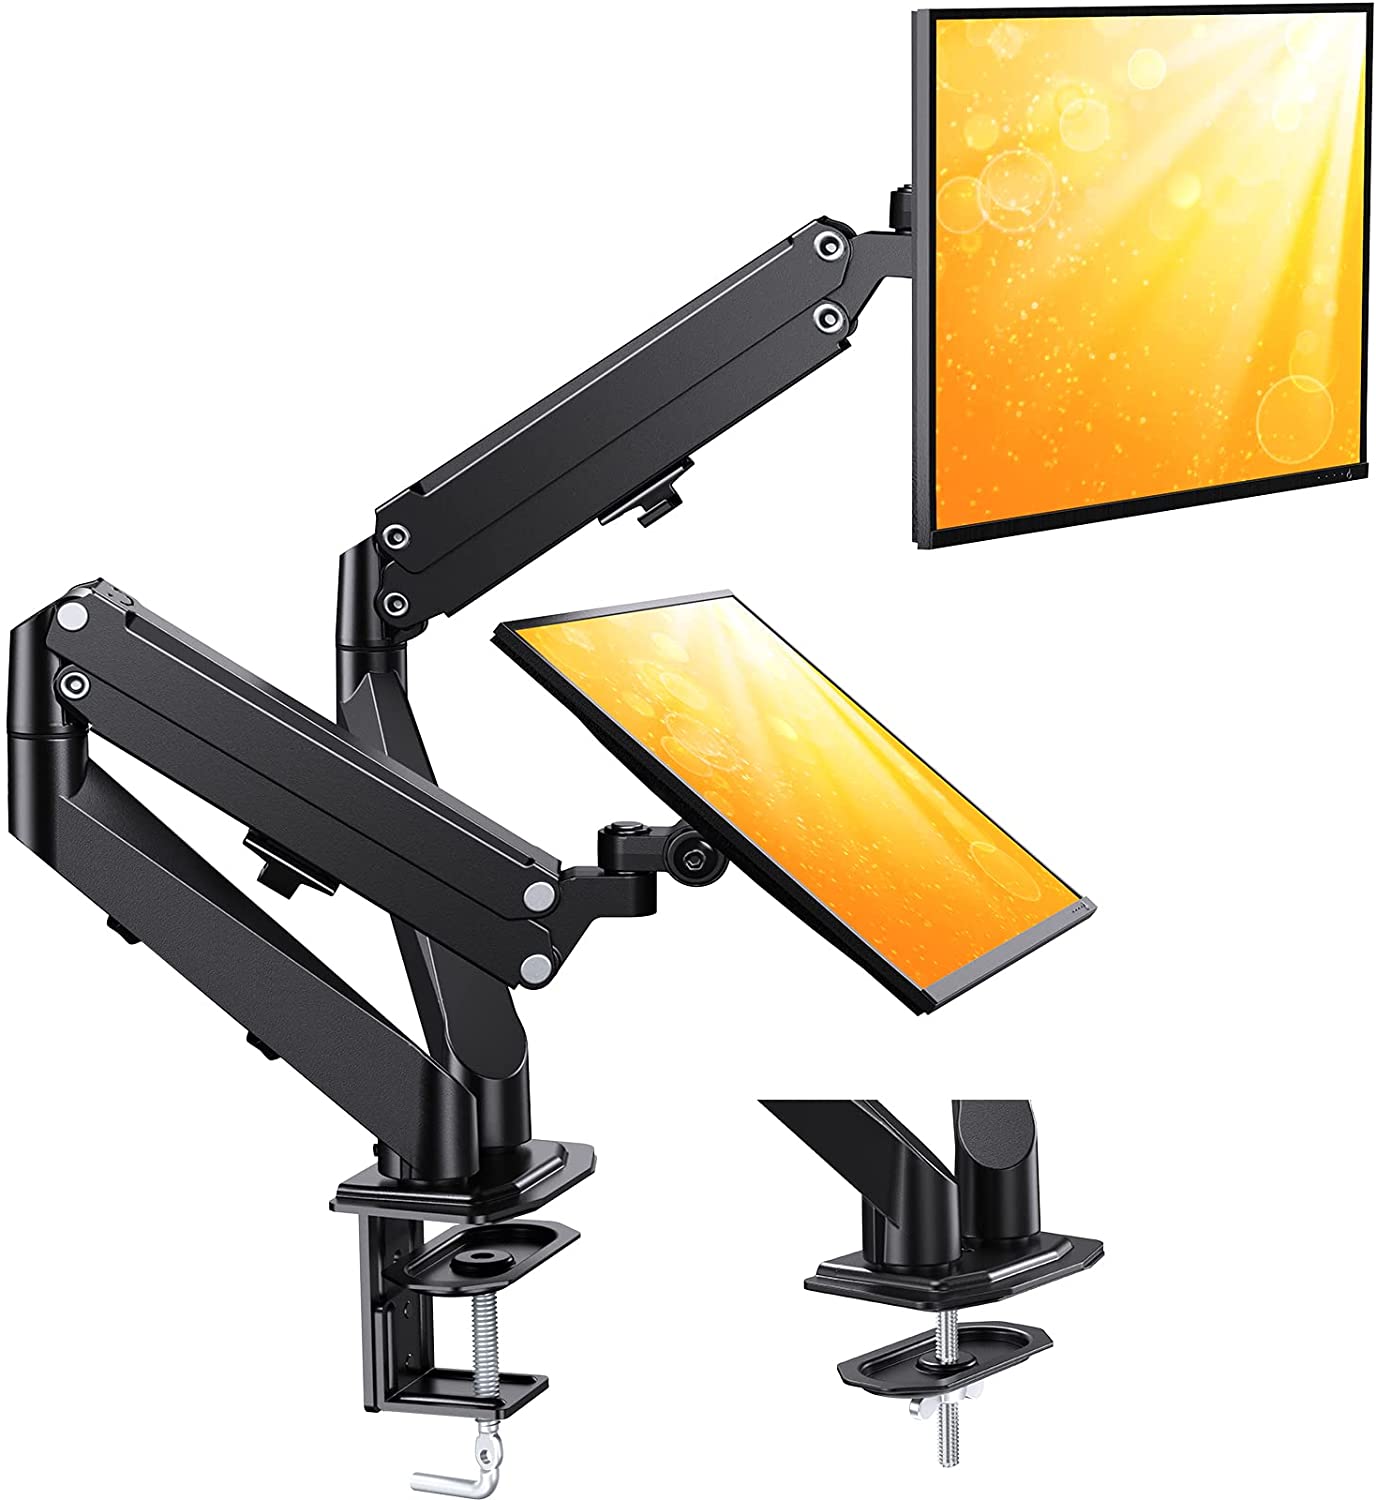 ErGear Dual Arm Adjustable Monitor Mount: (for 13-30" Monitors, up to 17.6-lbs) $35, (for 13-35" Monitors, up to 26.4-lbs) $70 + Free Shipping